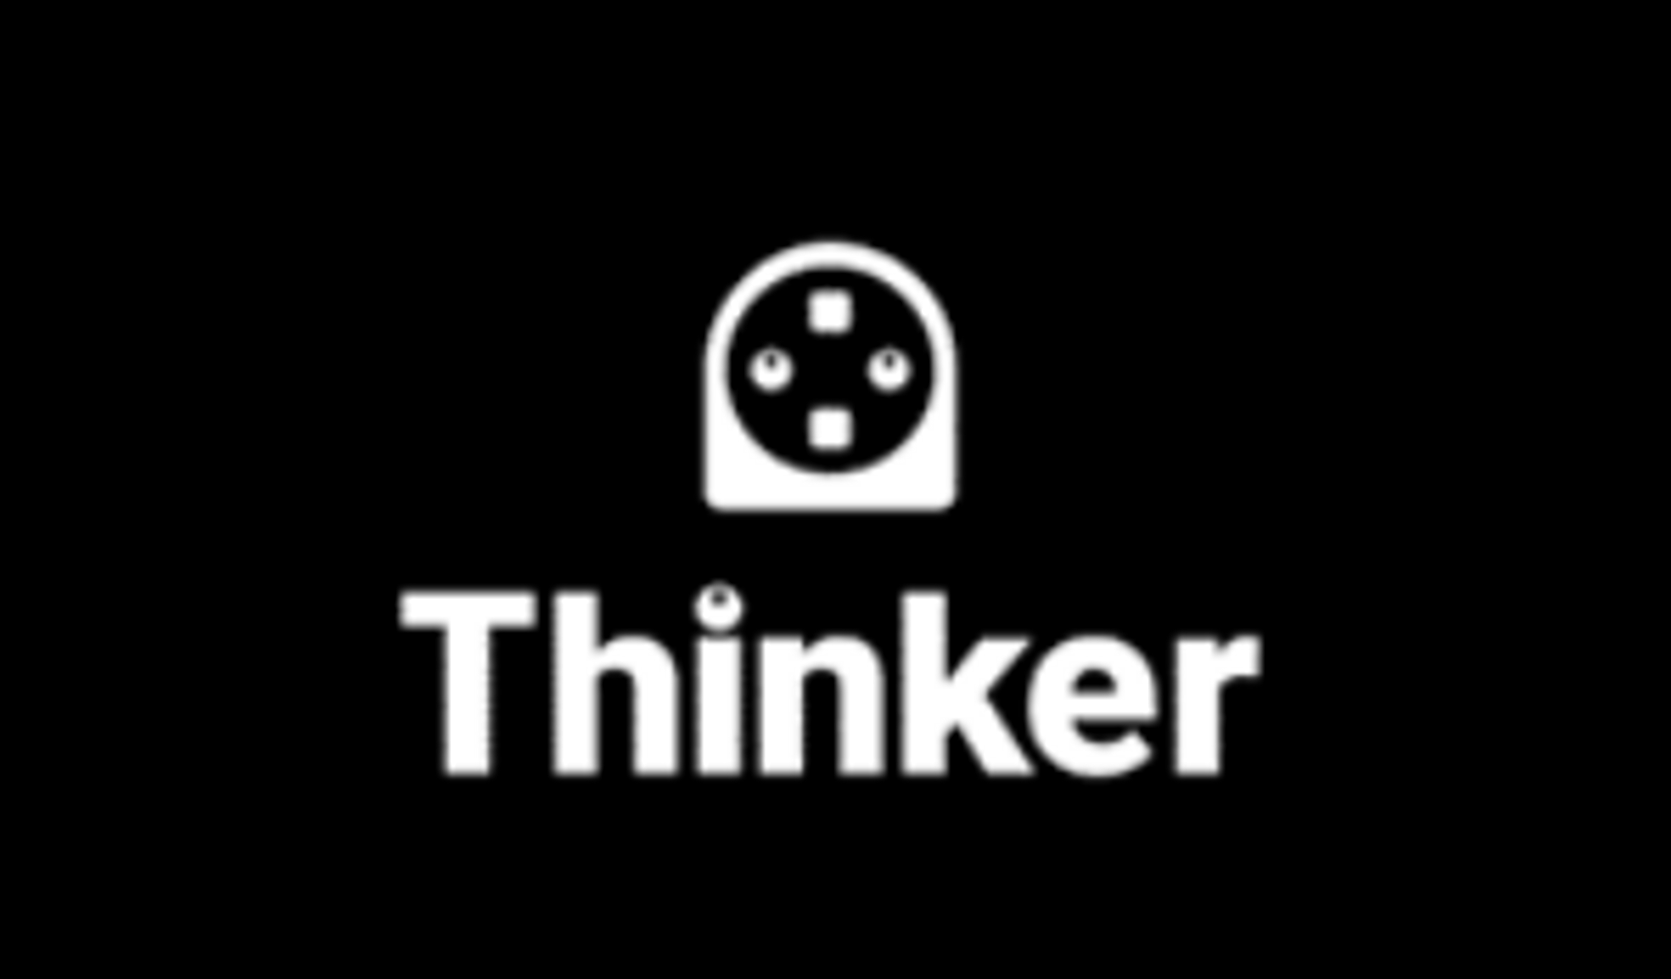 OUVC invested in Thinker Co., Ltd.